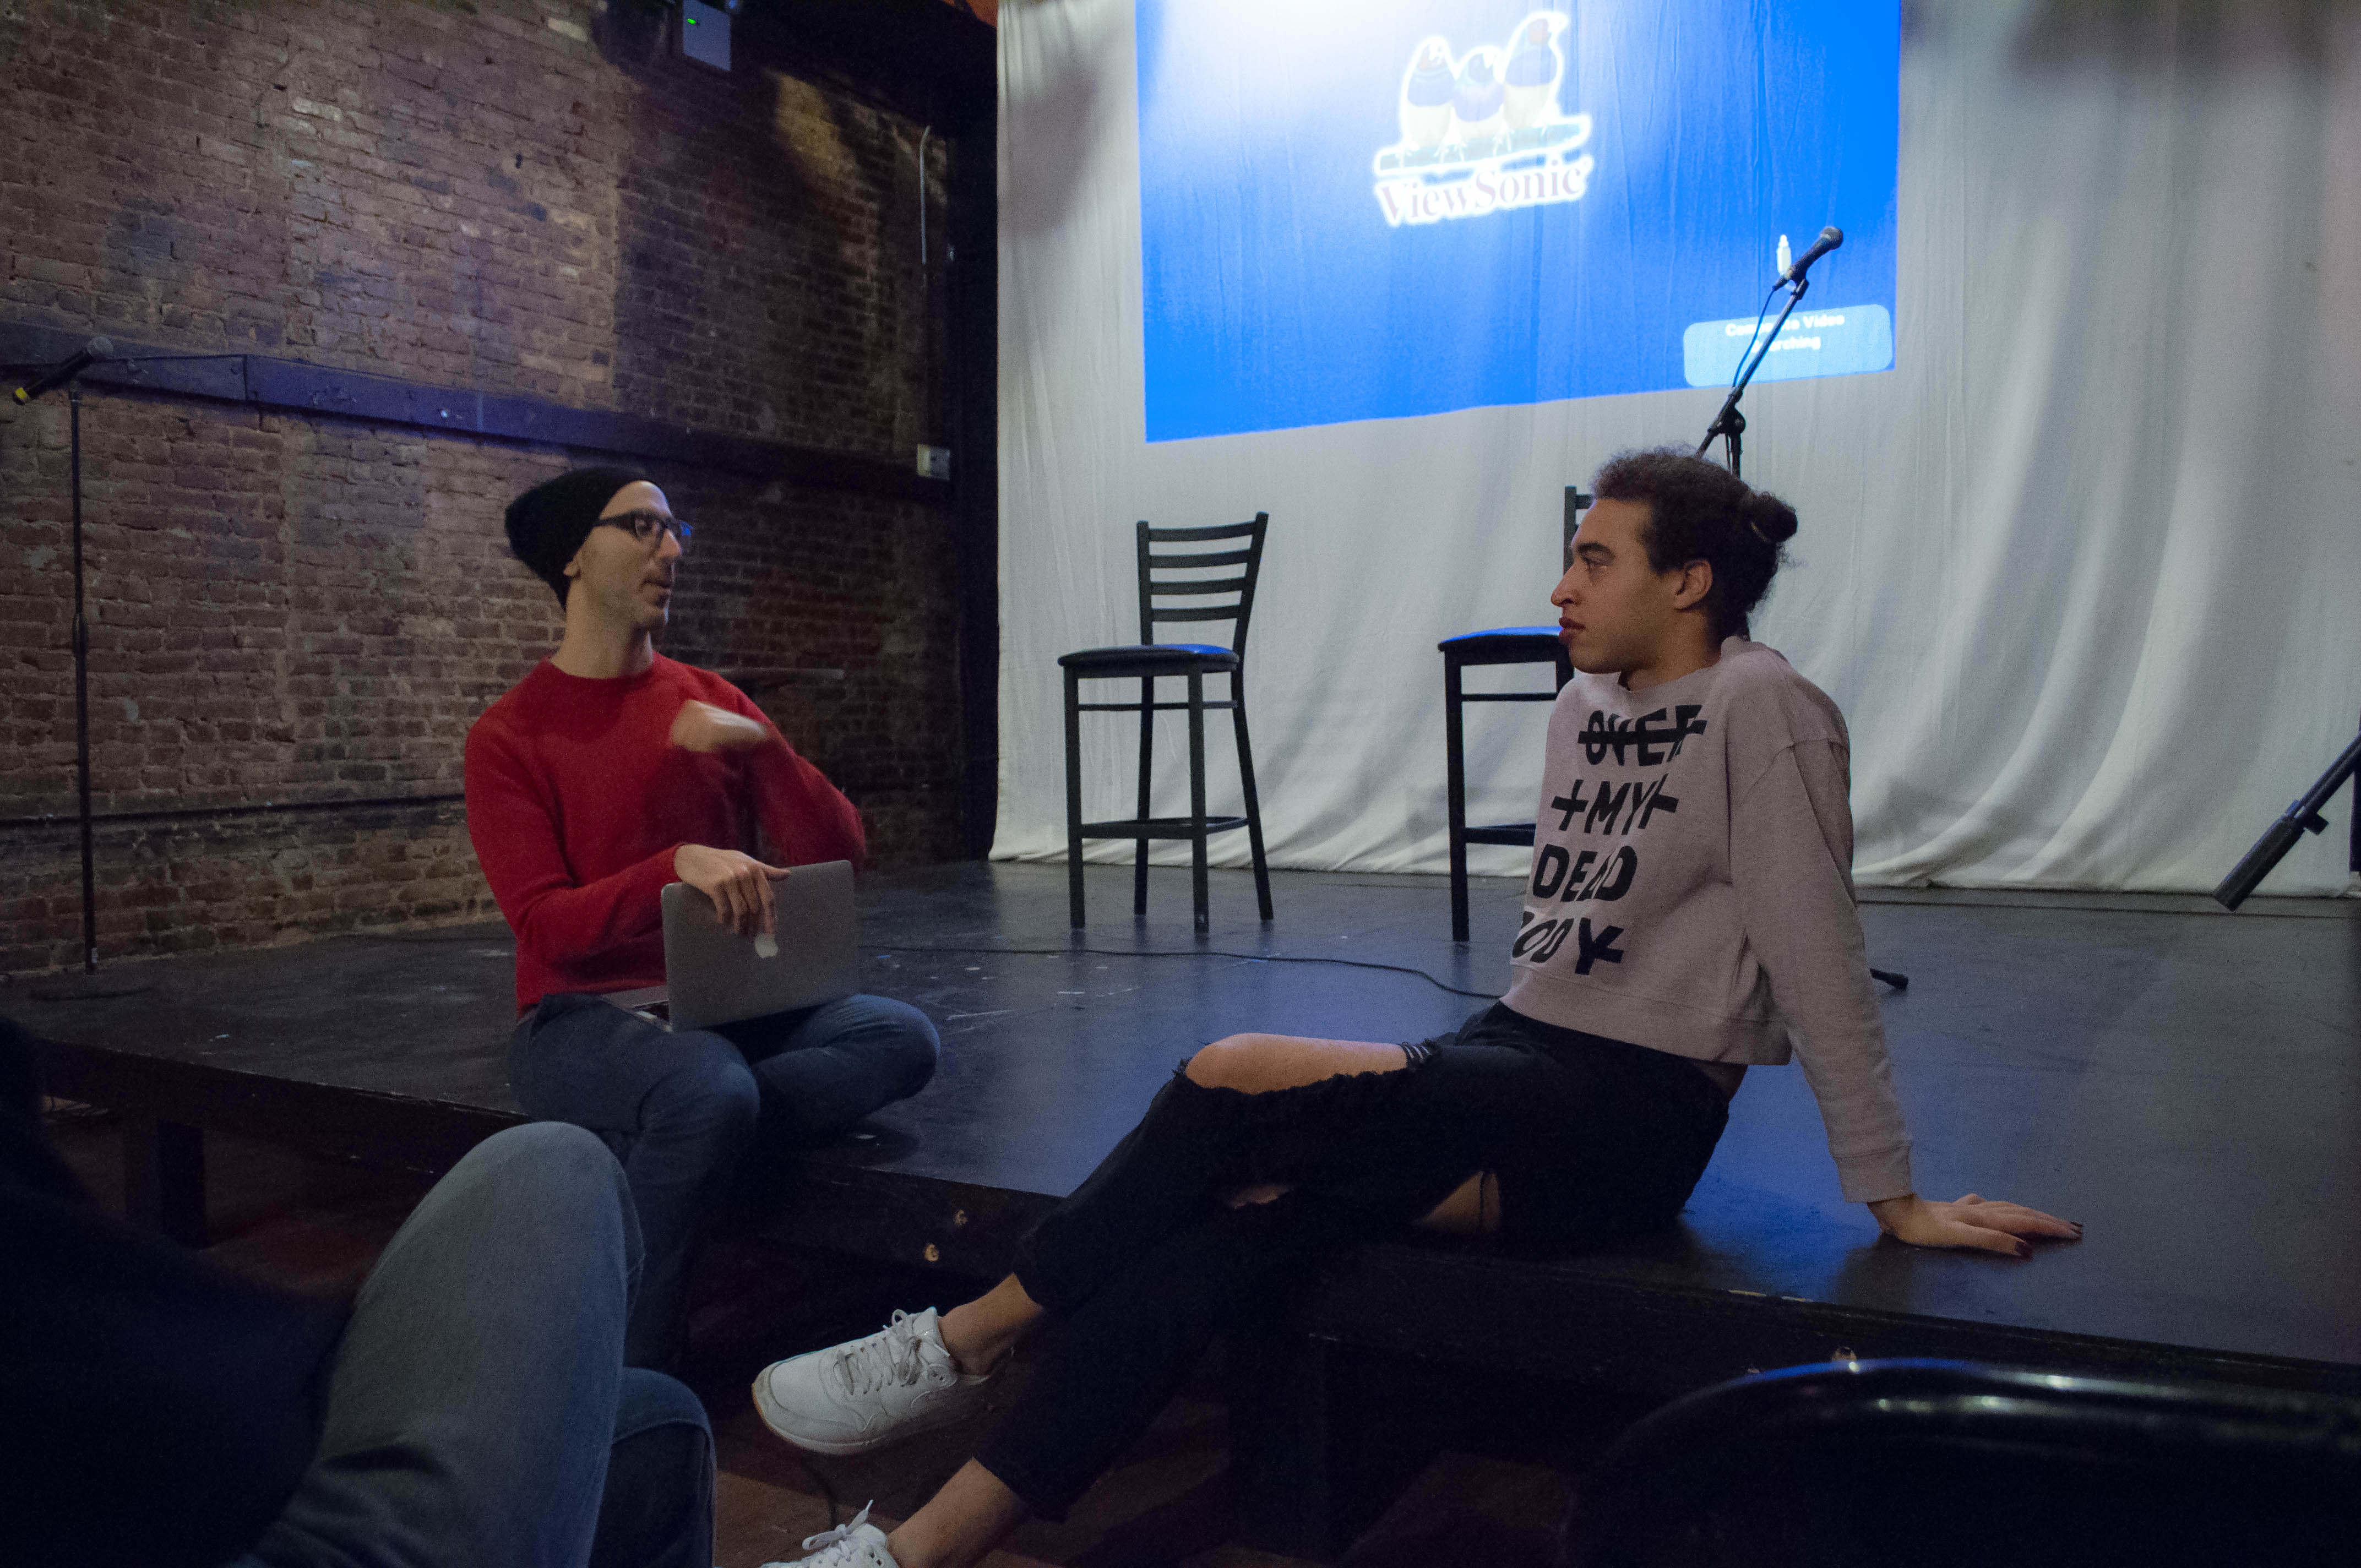 Zach Frater and Dan Fishback (curator and host of Squirts), chatting during rehearsal | Photo by Christian Cisneros